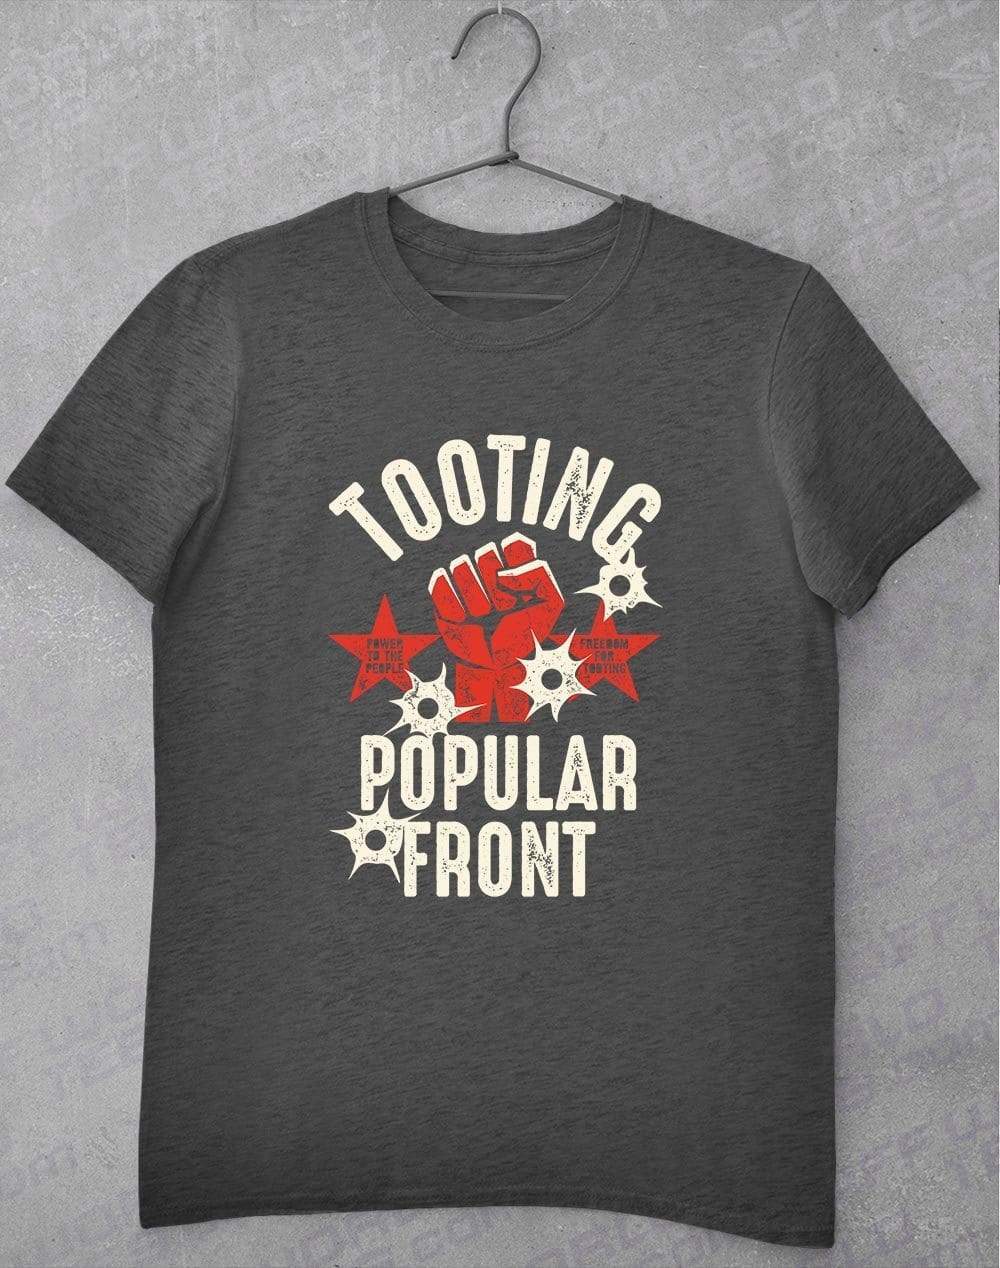 Tooting Popular Front T-Shirt S / Dark Heather  - Off World Tees